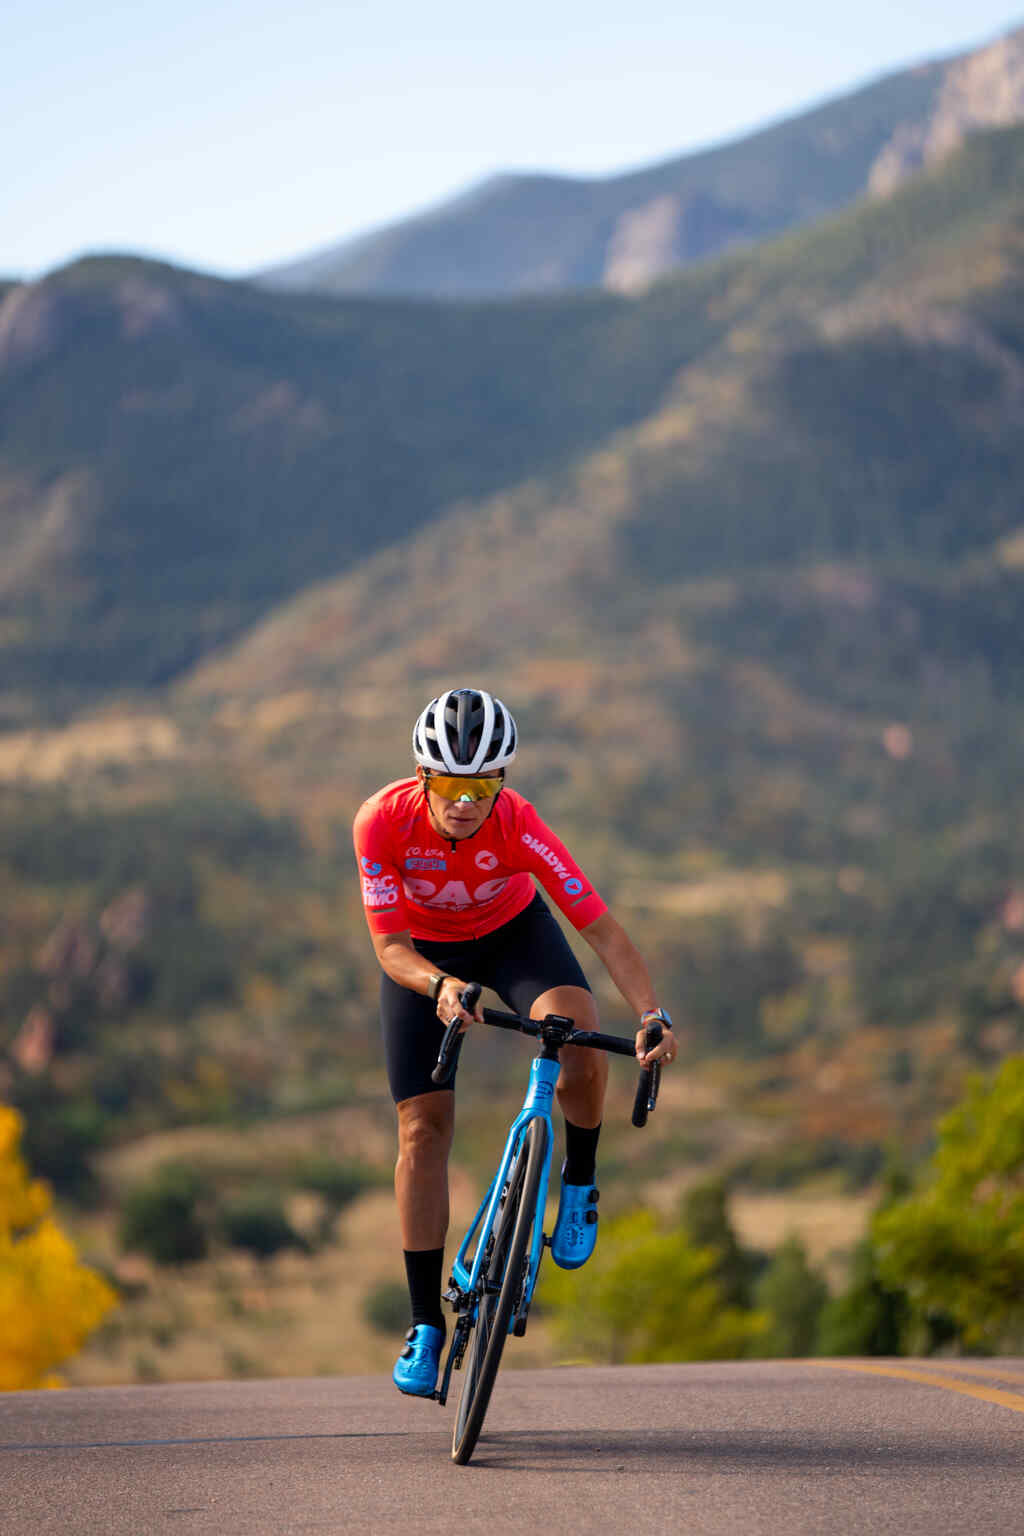 Cyclist in Hot Pink Jersey riding in Garden of the Gods